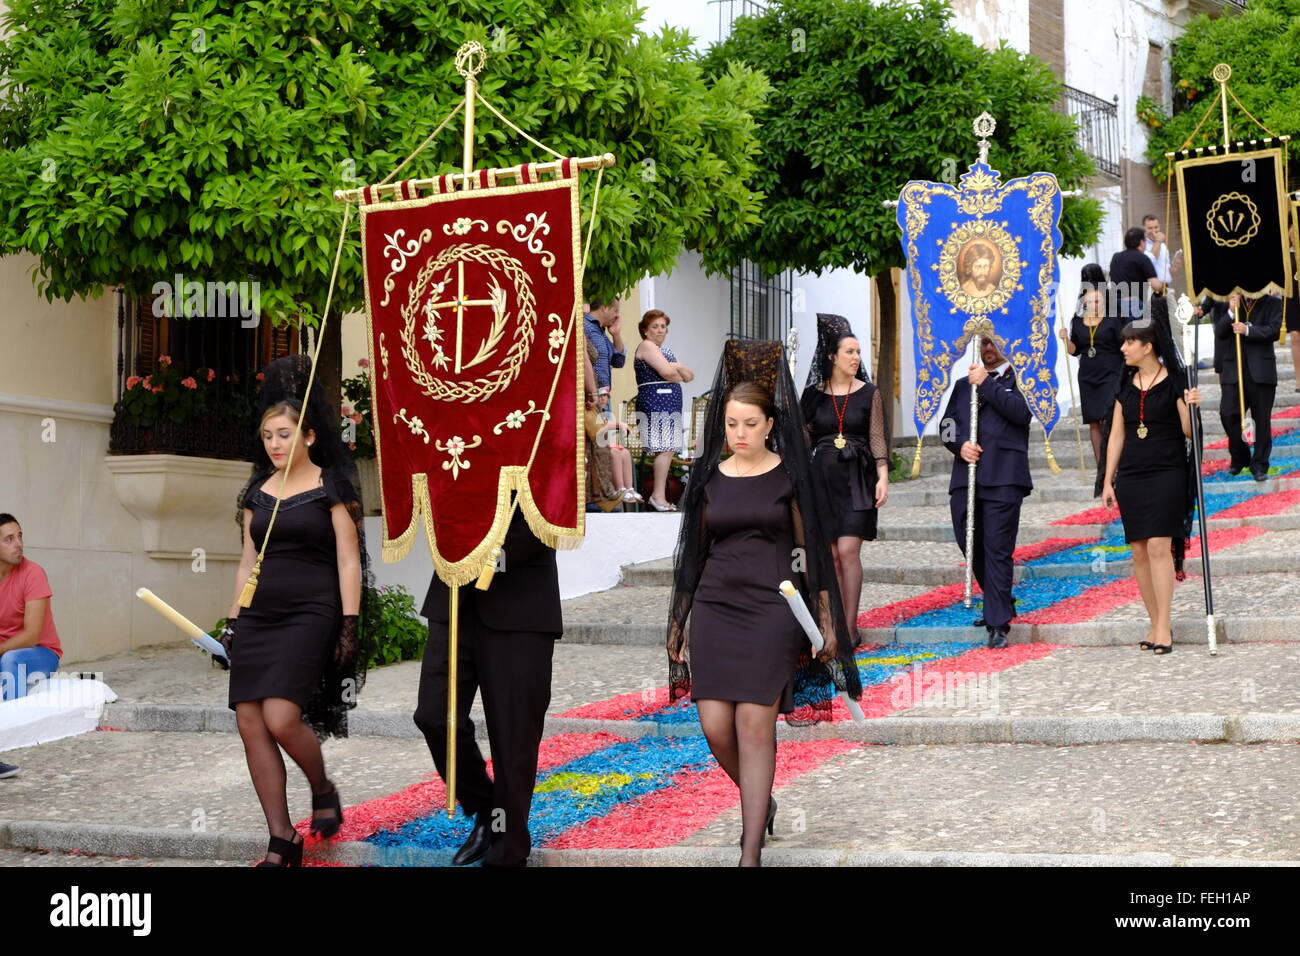 Corpus Christi procession on carpets of coloured wood chippings laid down on the streets of Carcabuey, Cordoba Province, Andalusia, Sapin Stock Photo